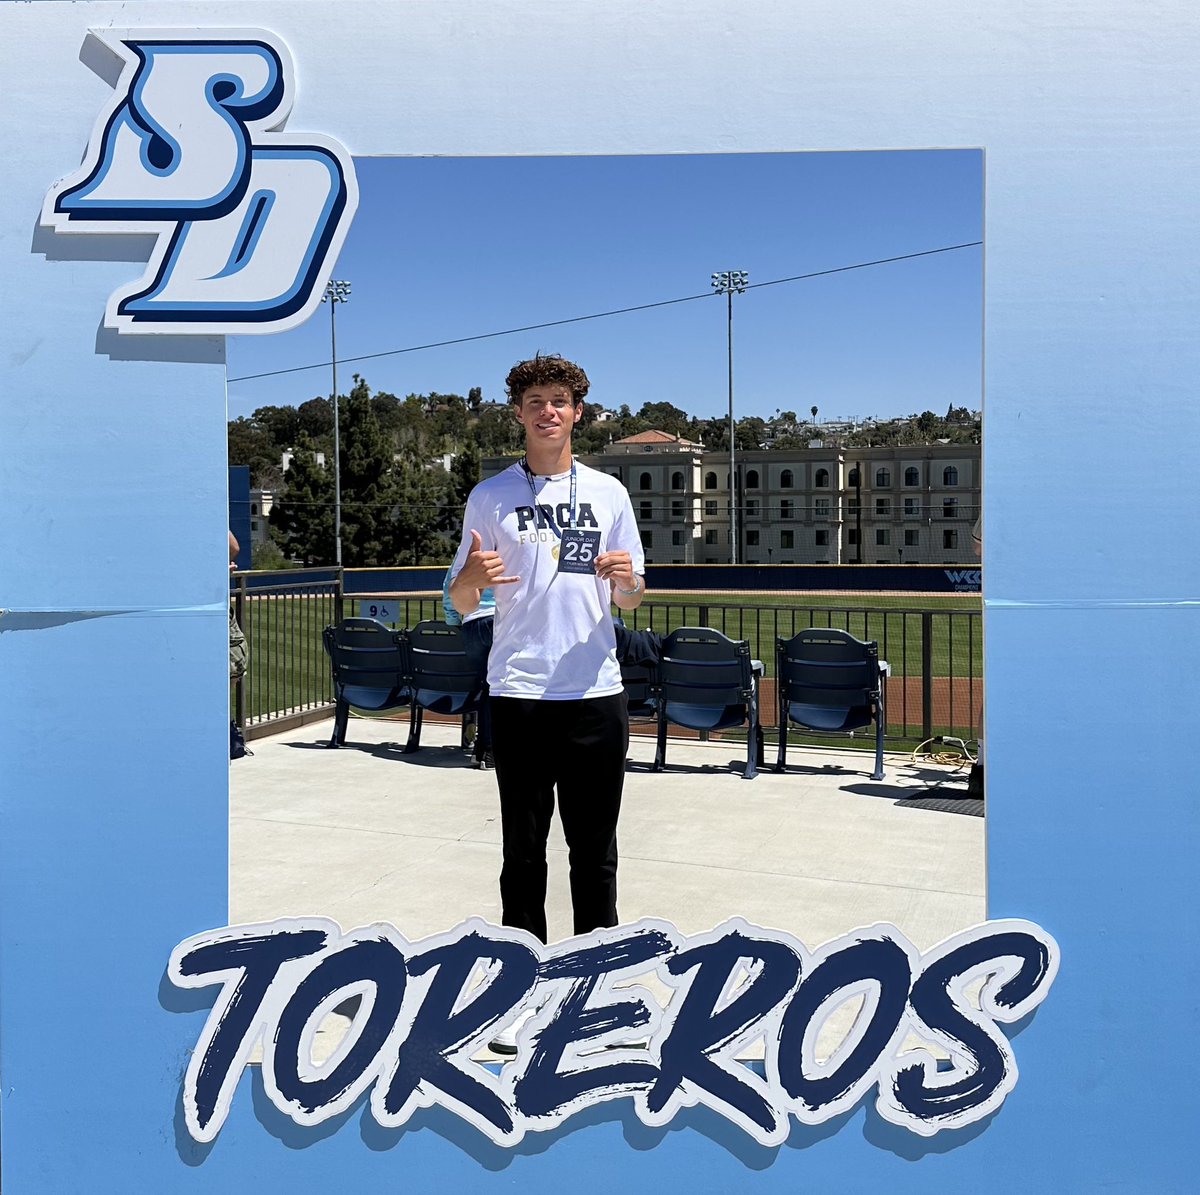 Had a great Junior Day Visit @USDFootball today! Thank you to @madbacker56 @coachsweetlou @coach_MAponte @Coach_Heffler for showing us the campus. Looking forward to competing at the prospect camp! @steverausch17 @AZKicking @Chris_Sailer @SOAZFootball @gridironarizona